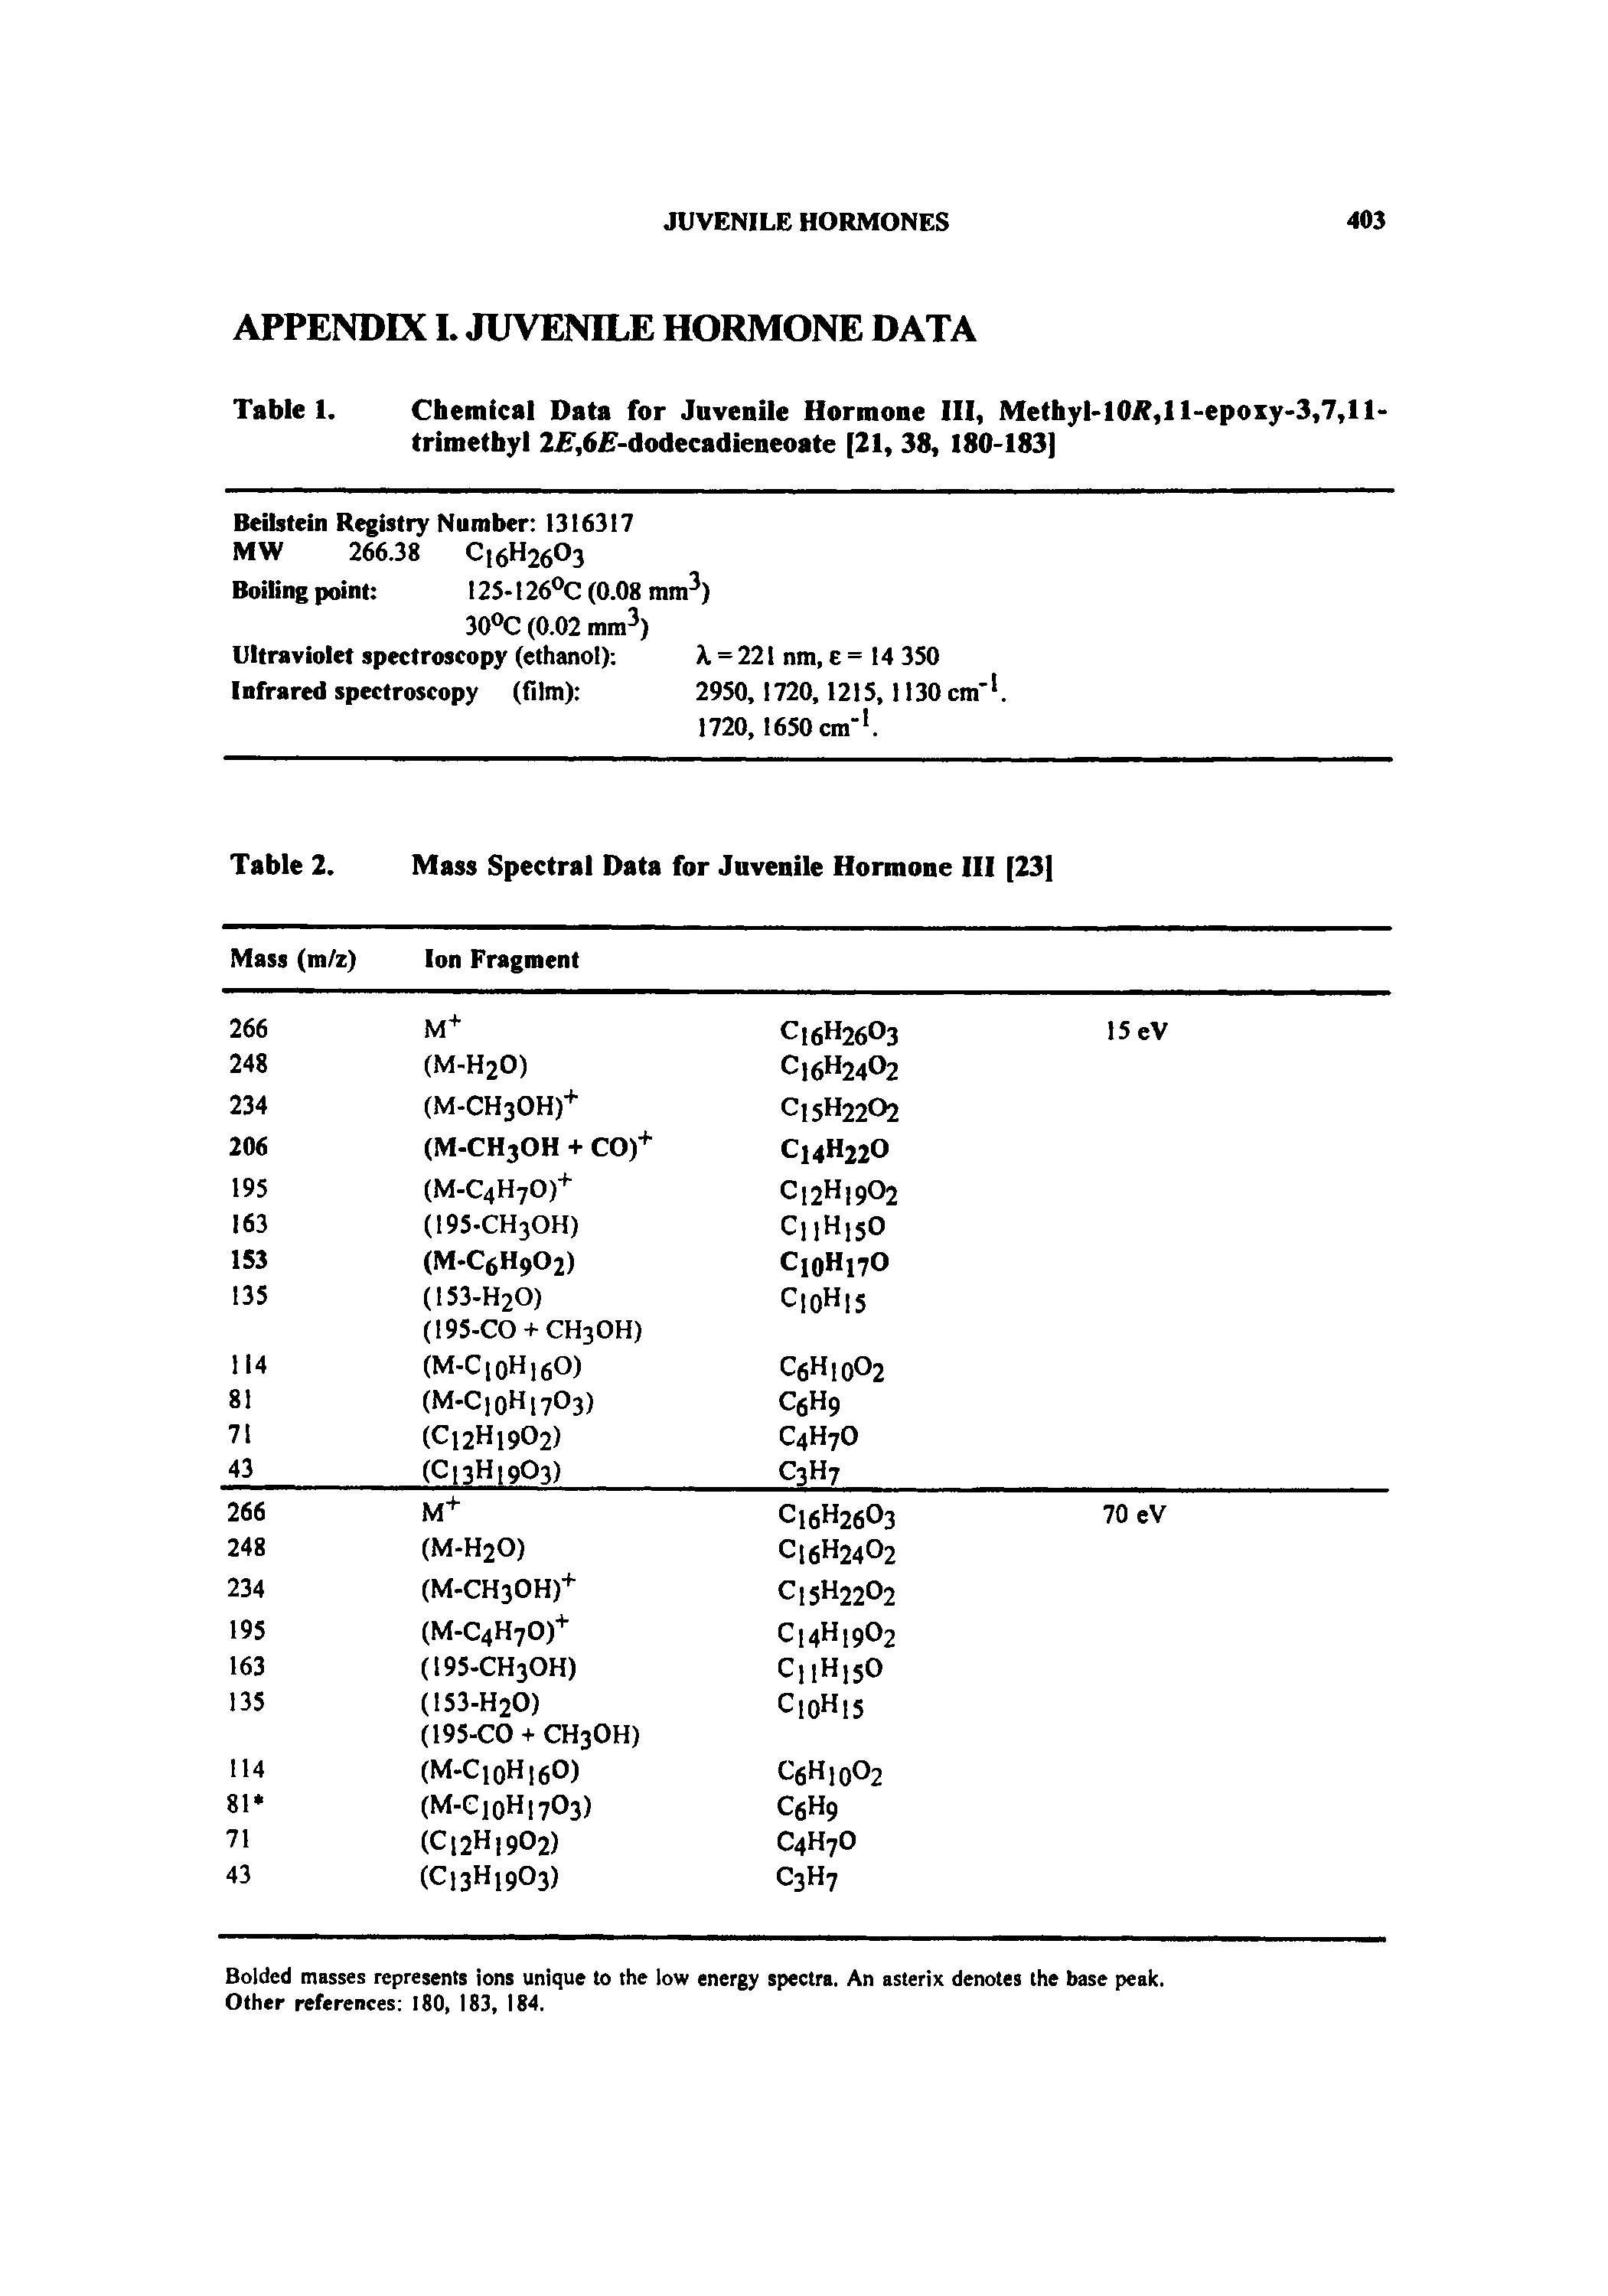 Table 2. Mass Spectral Data for Juvenile Hormone III [23]...